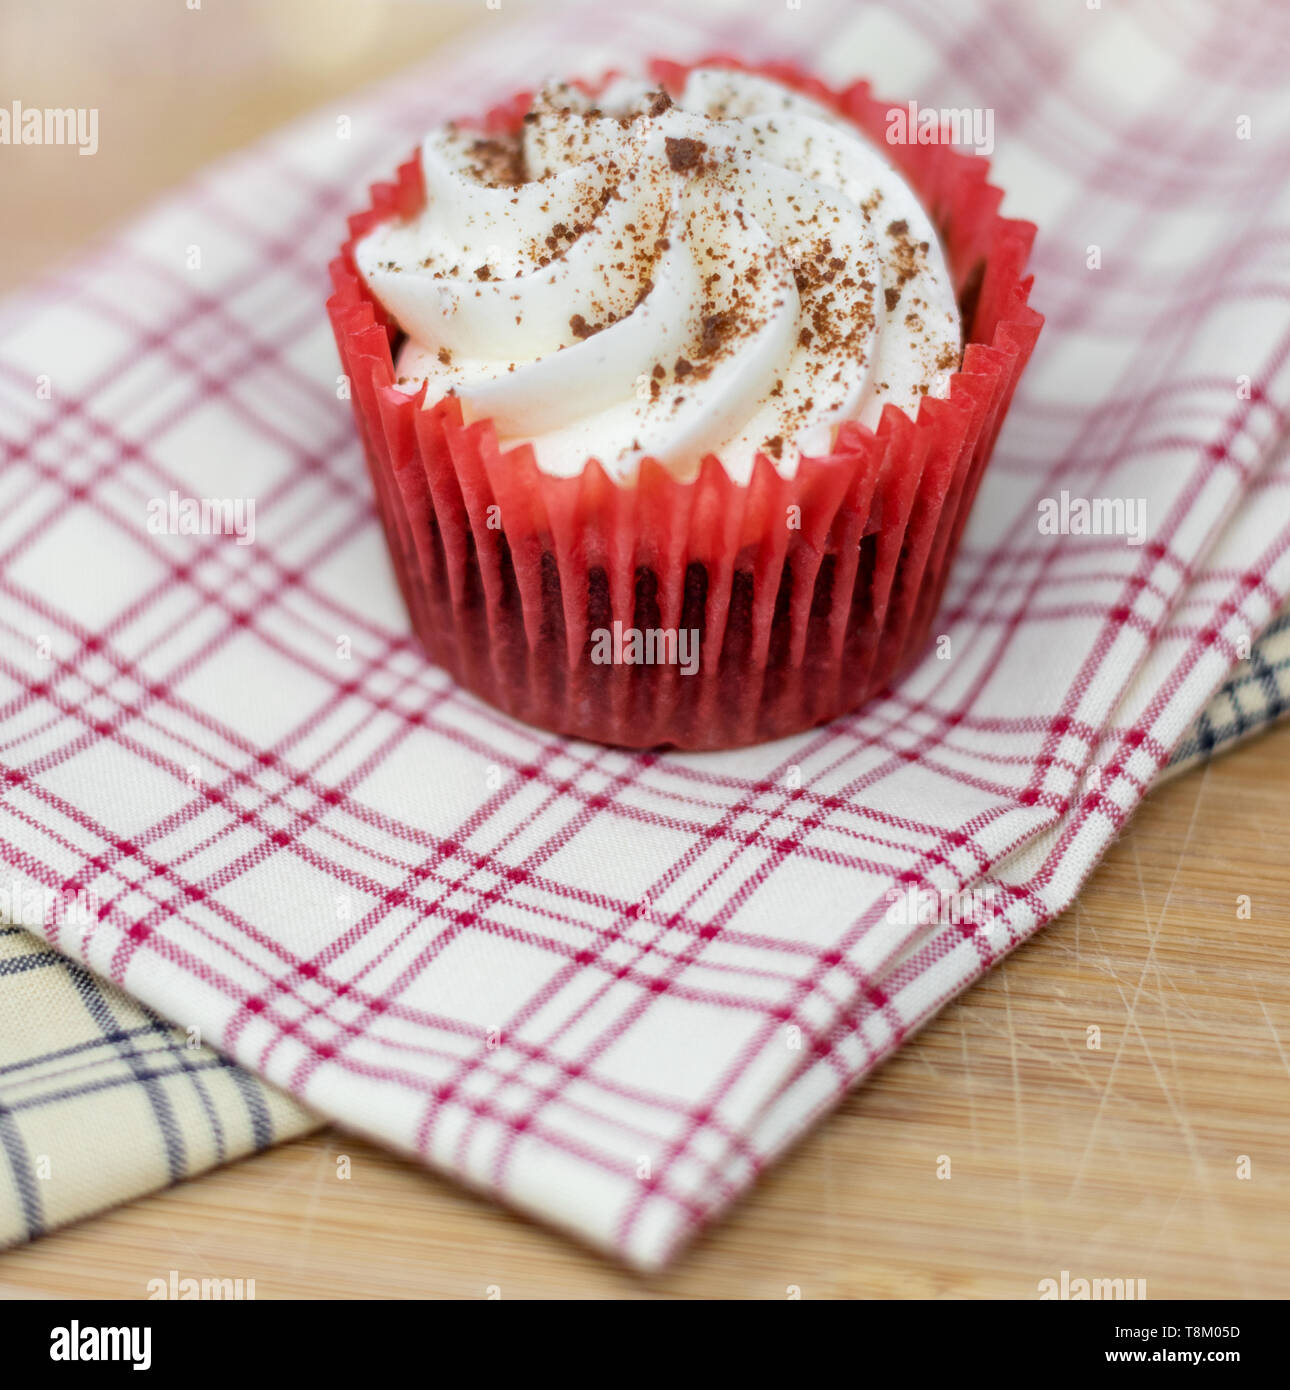 Red velvet cupcake on decorative plaid cloth with a shallow depth of field Stock Photo